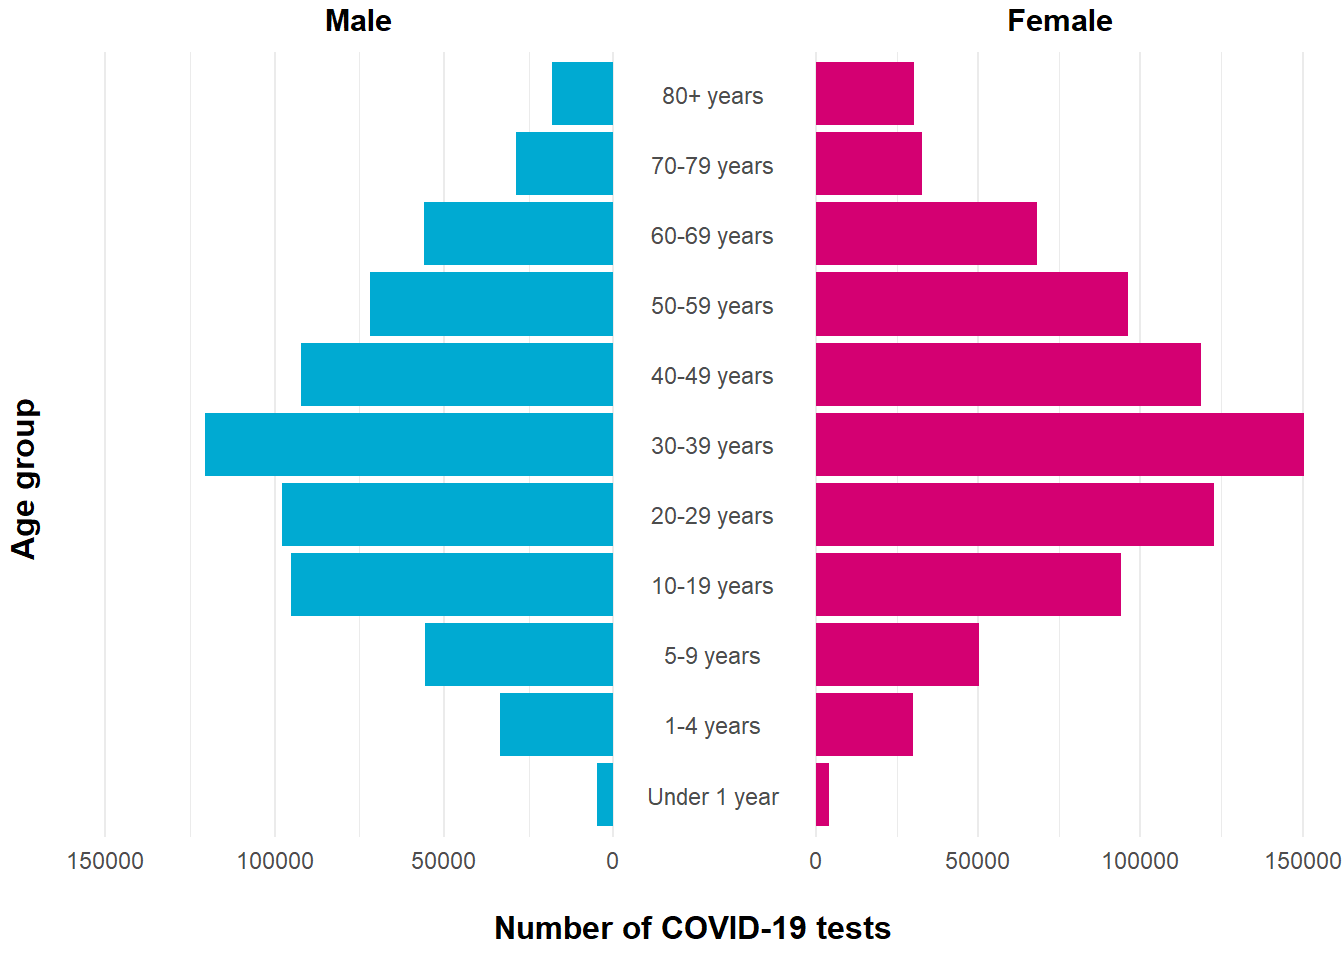 People tested for COVID-19 in Alberta by age group and gender.